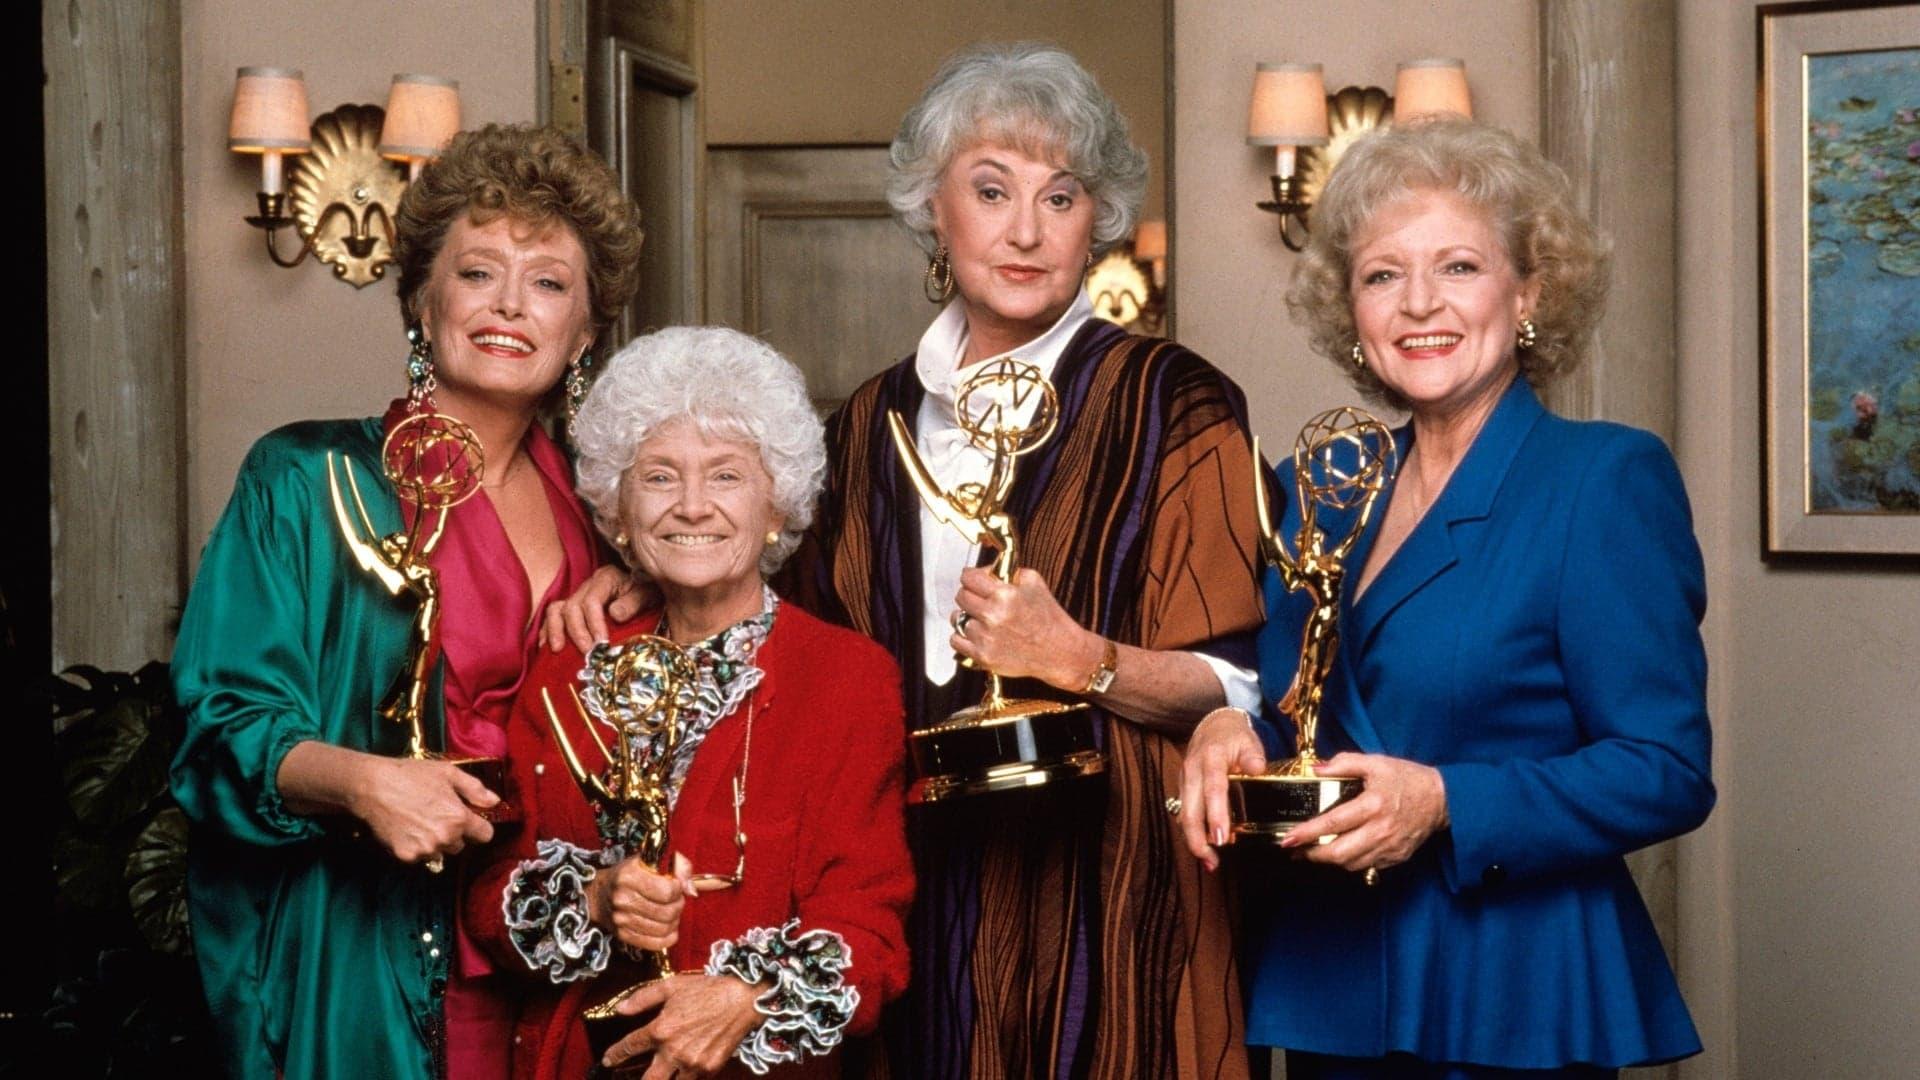 The Golden Girls: Their Greatest Moments backdrop